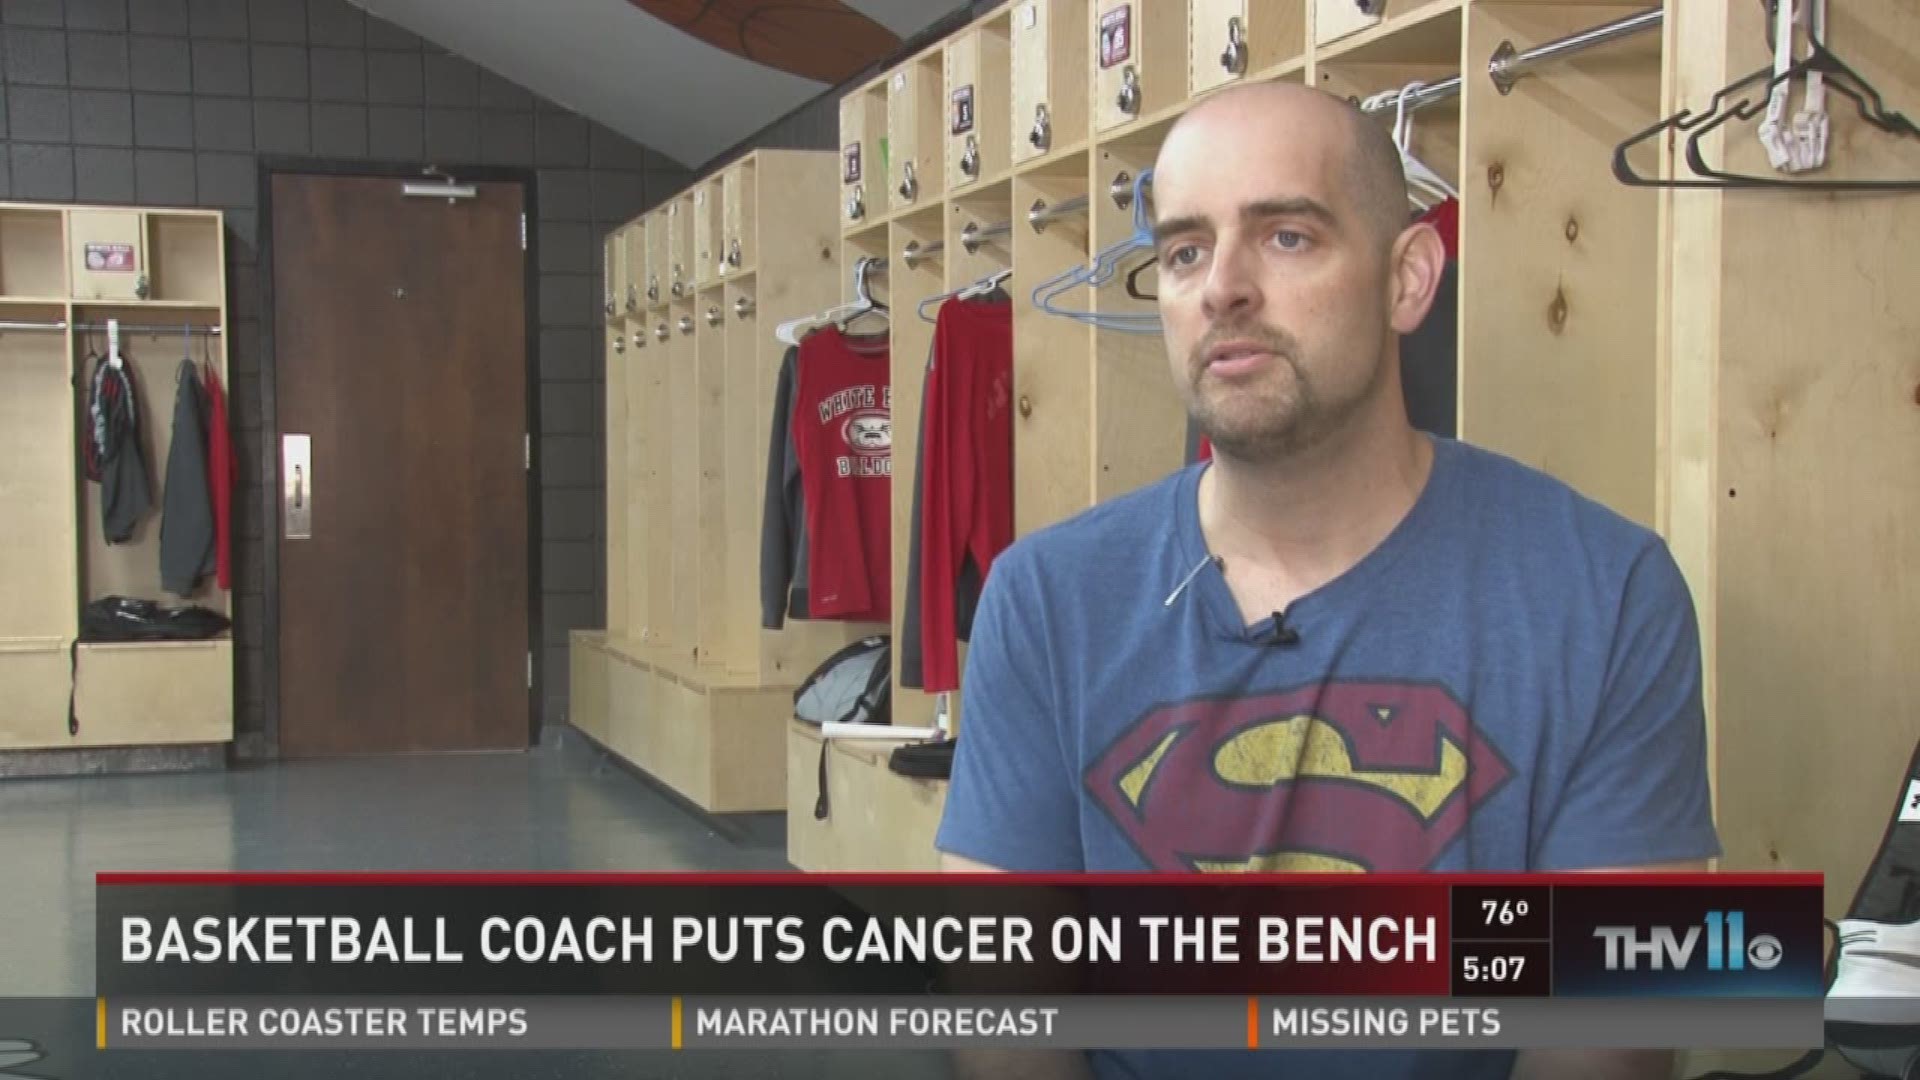 White Hall coach puts cancer on the bench